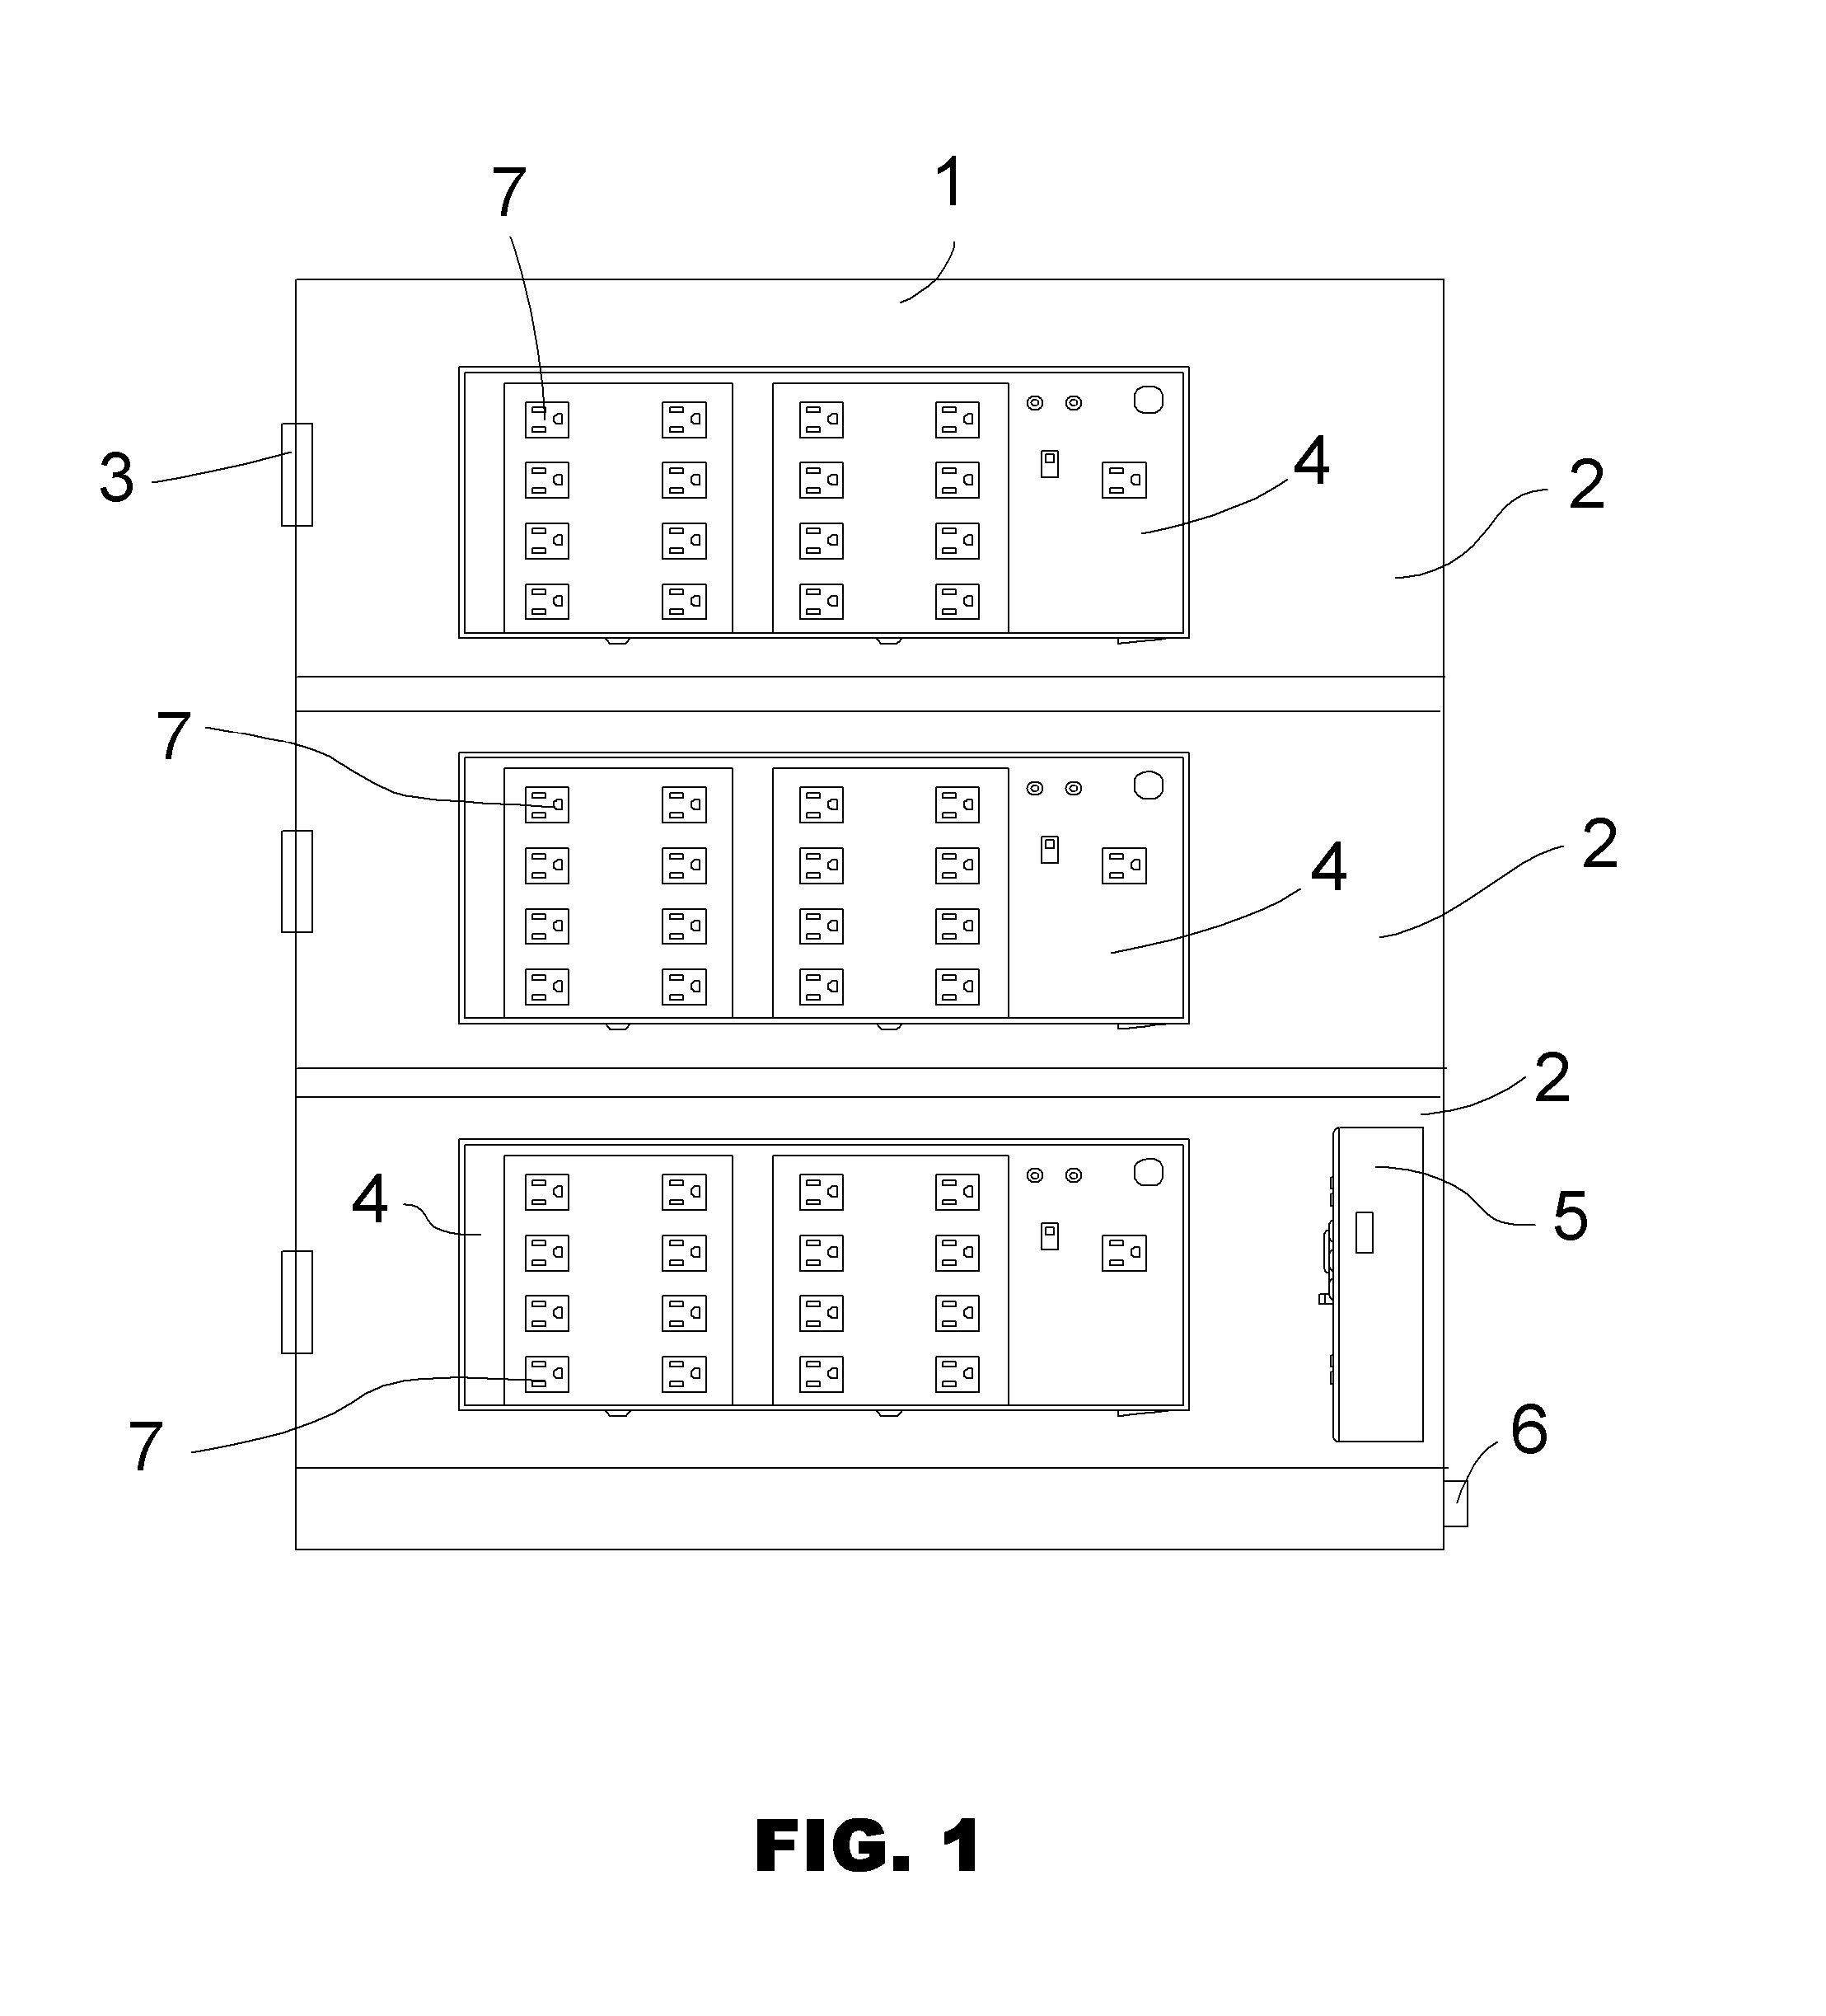 System and Method for Charging Portable Electronic Devices